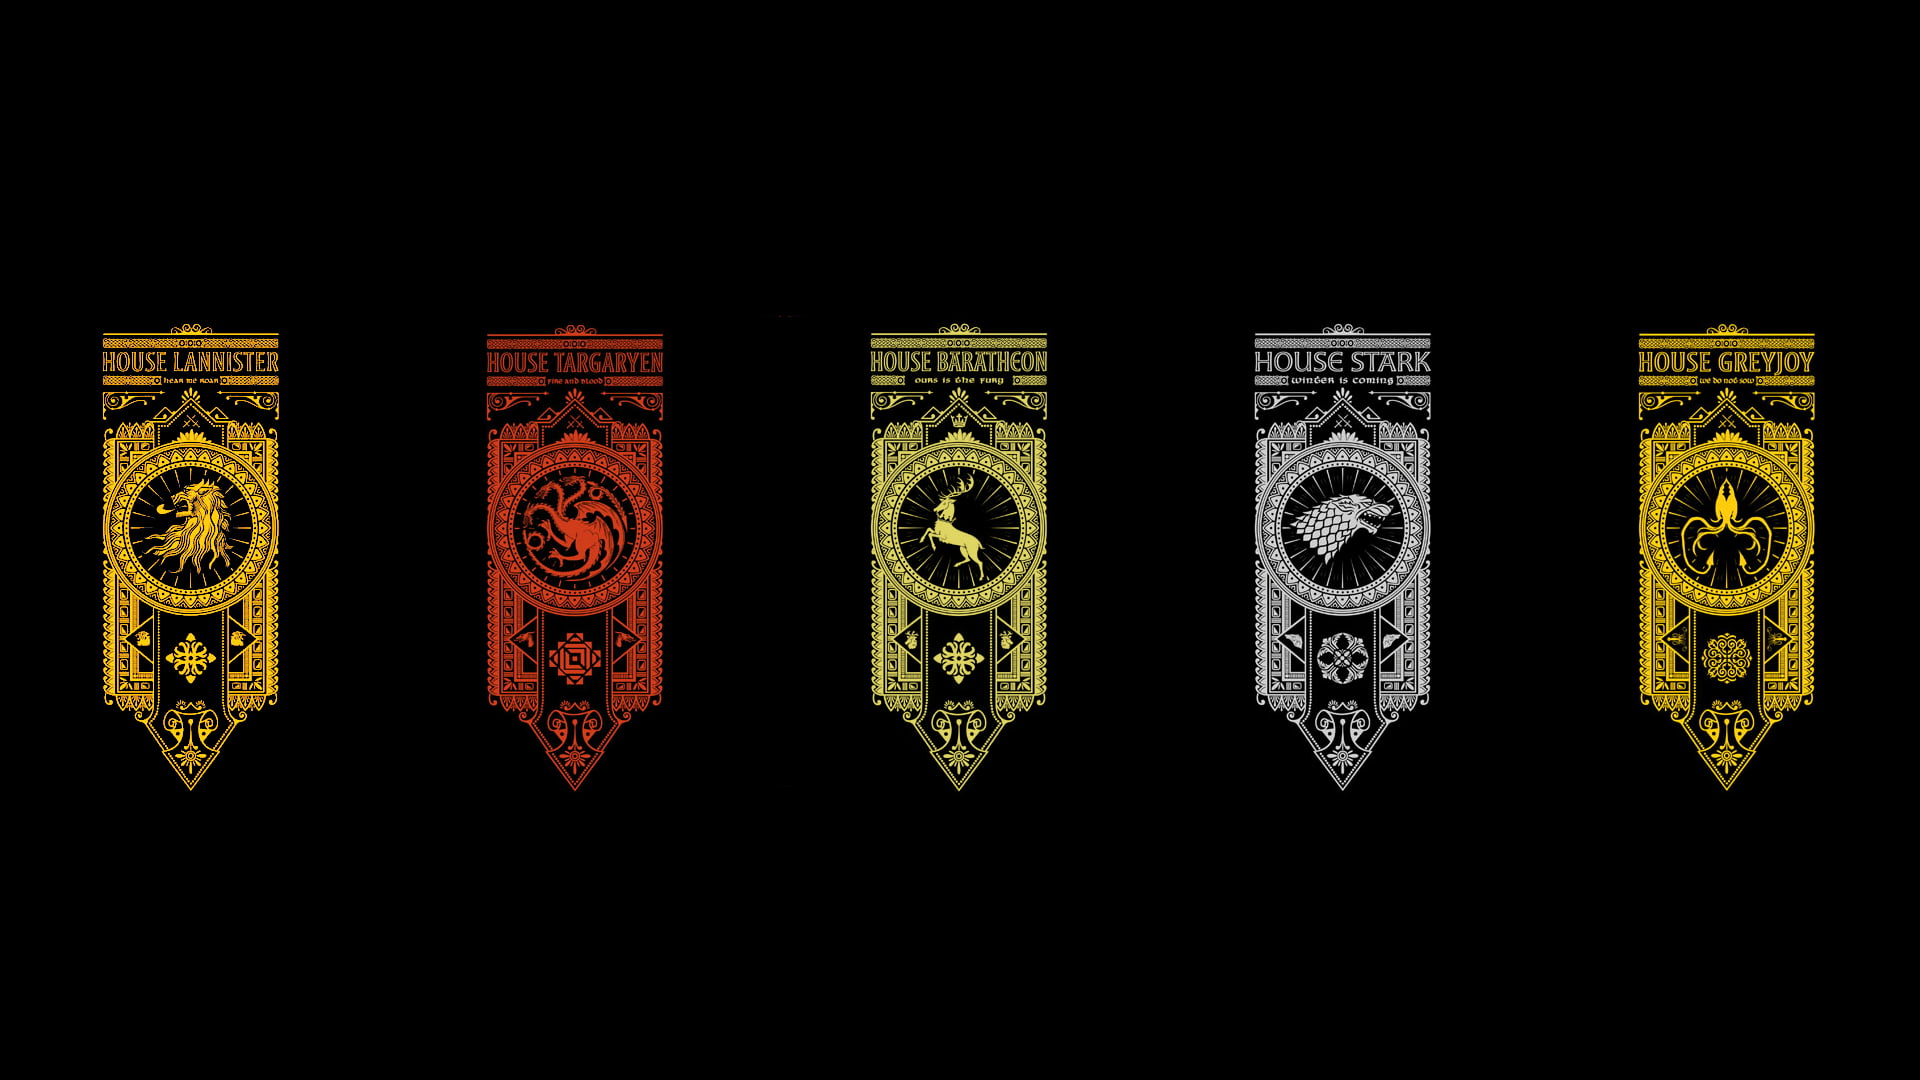 Game Of Thrones Wallpapers Game Of Thrones Sigils Hd Wallpaper